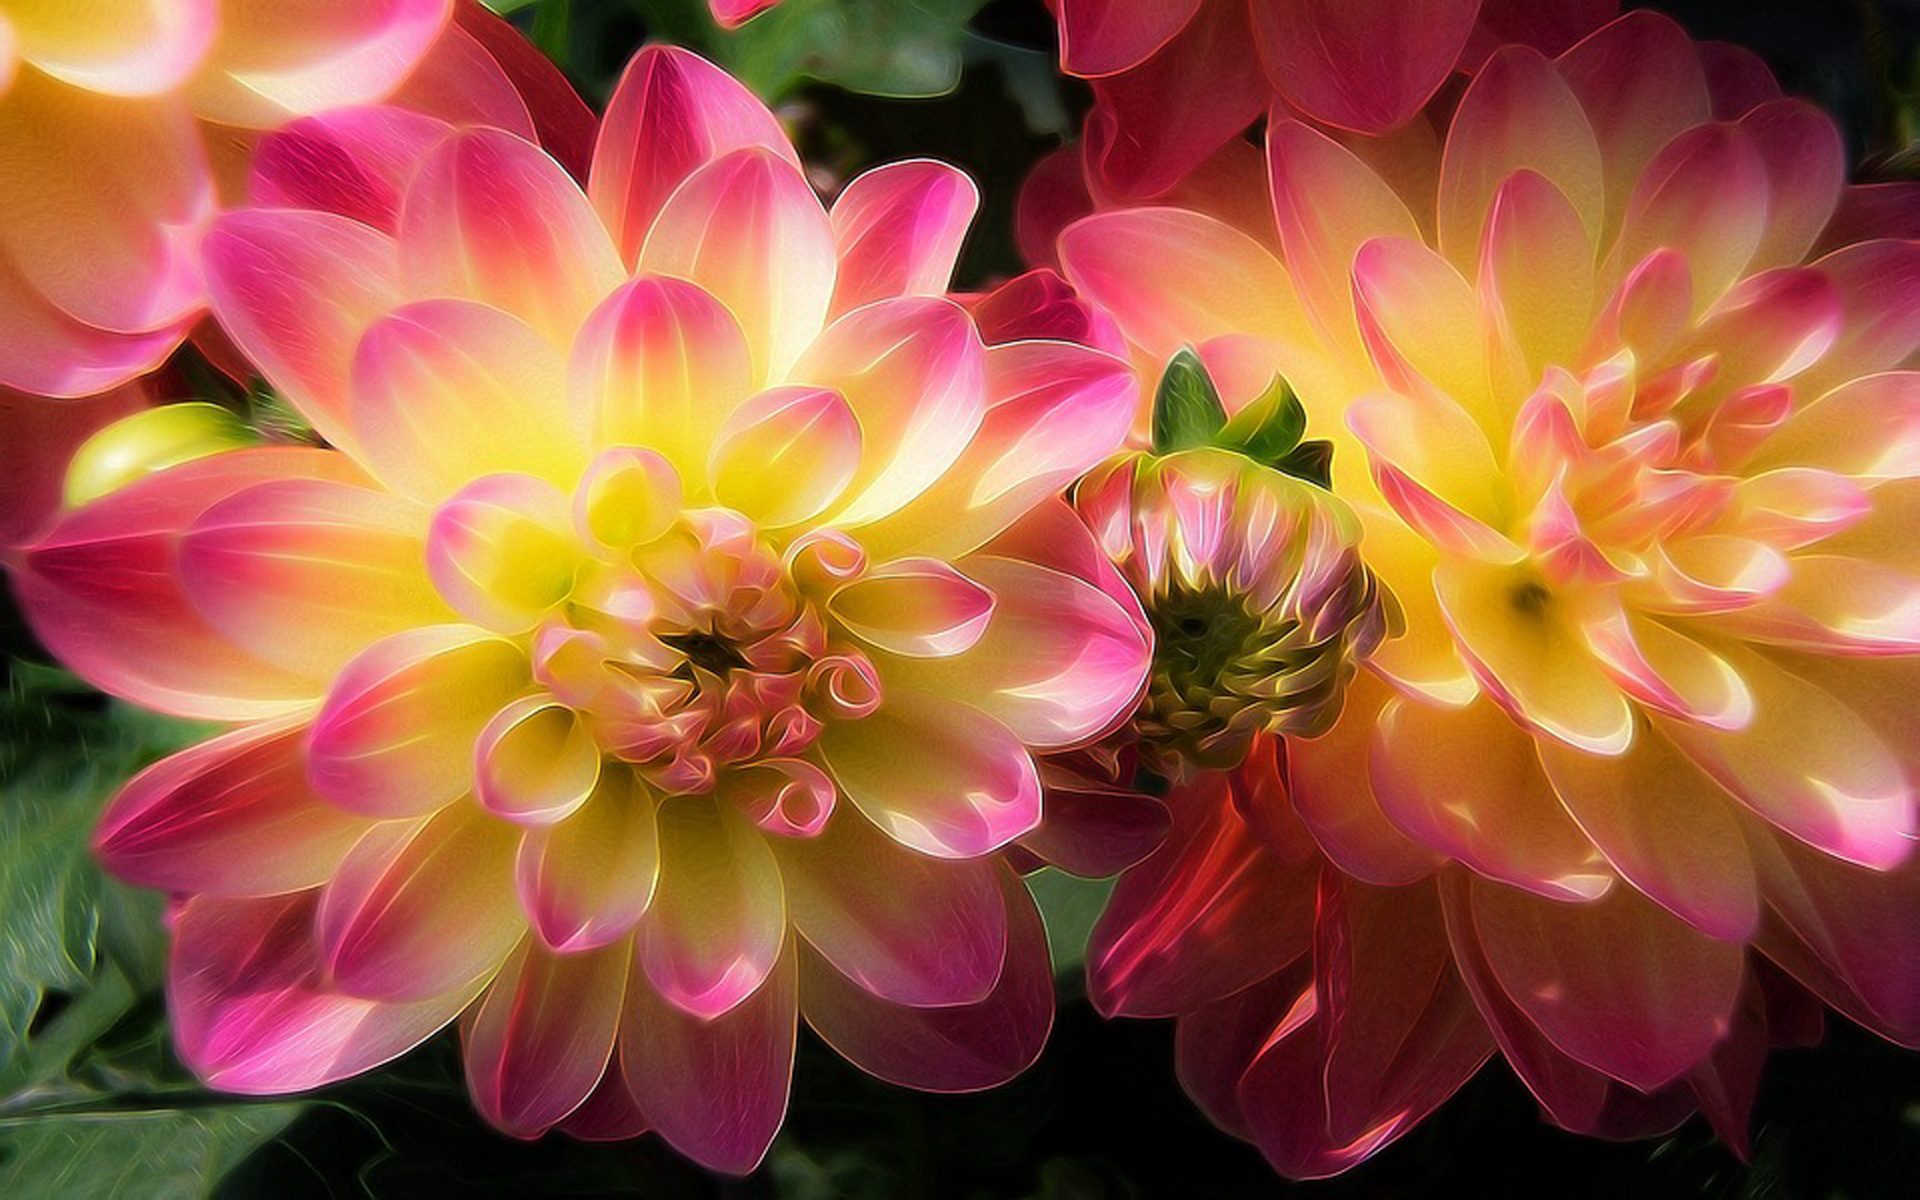 Pink Dahlias by Thomas Wolter